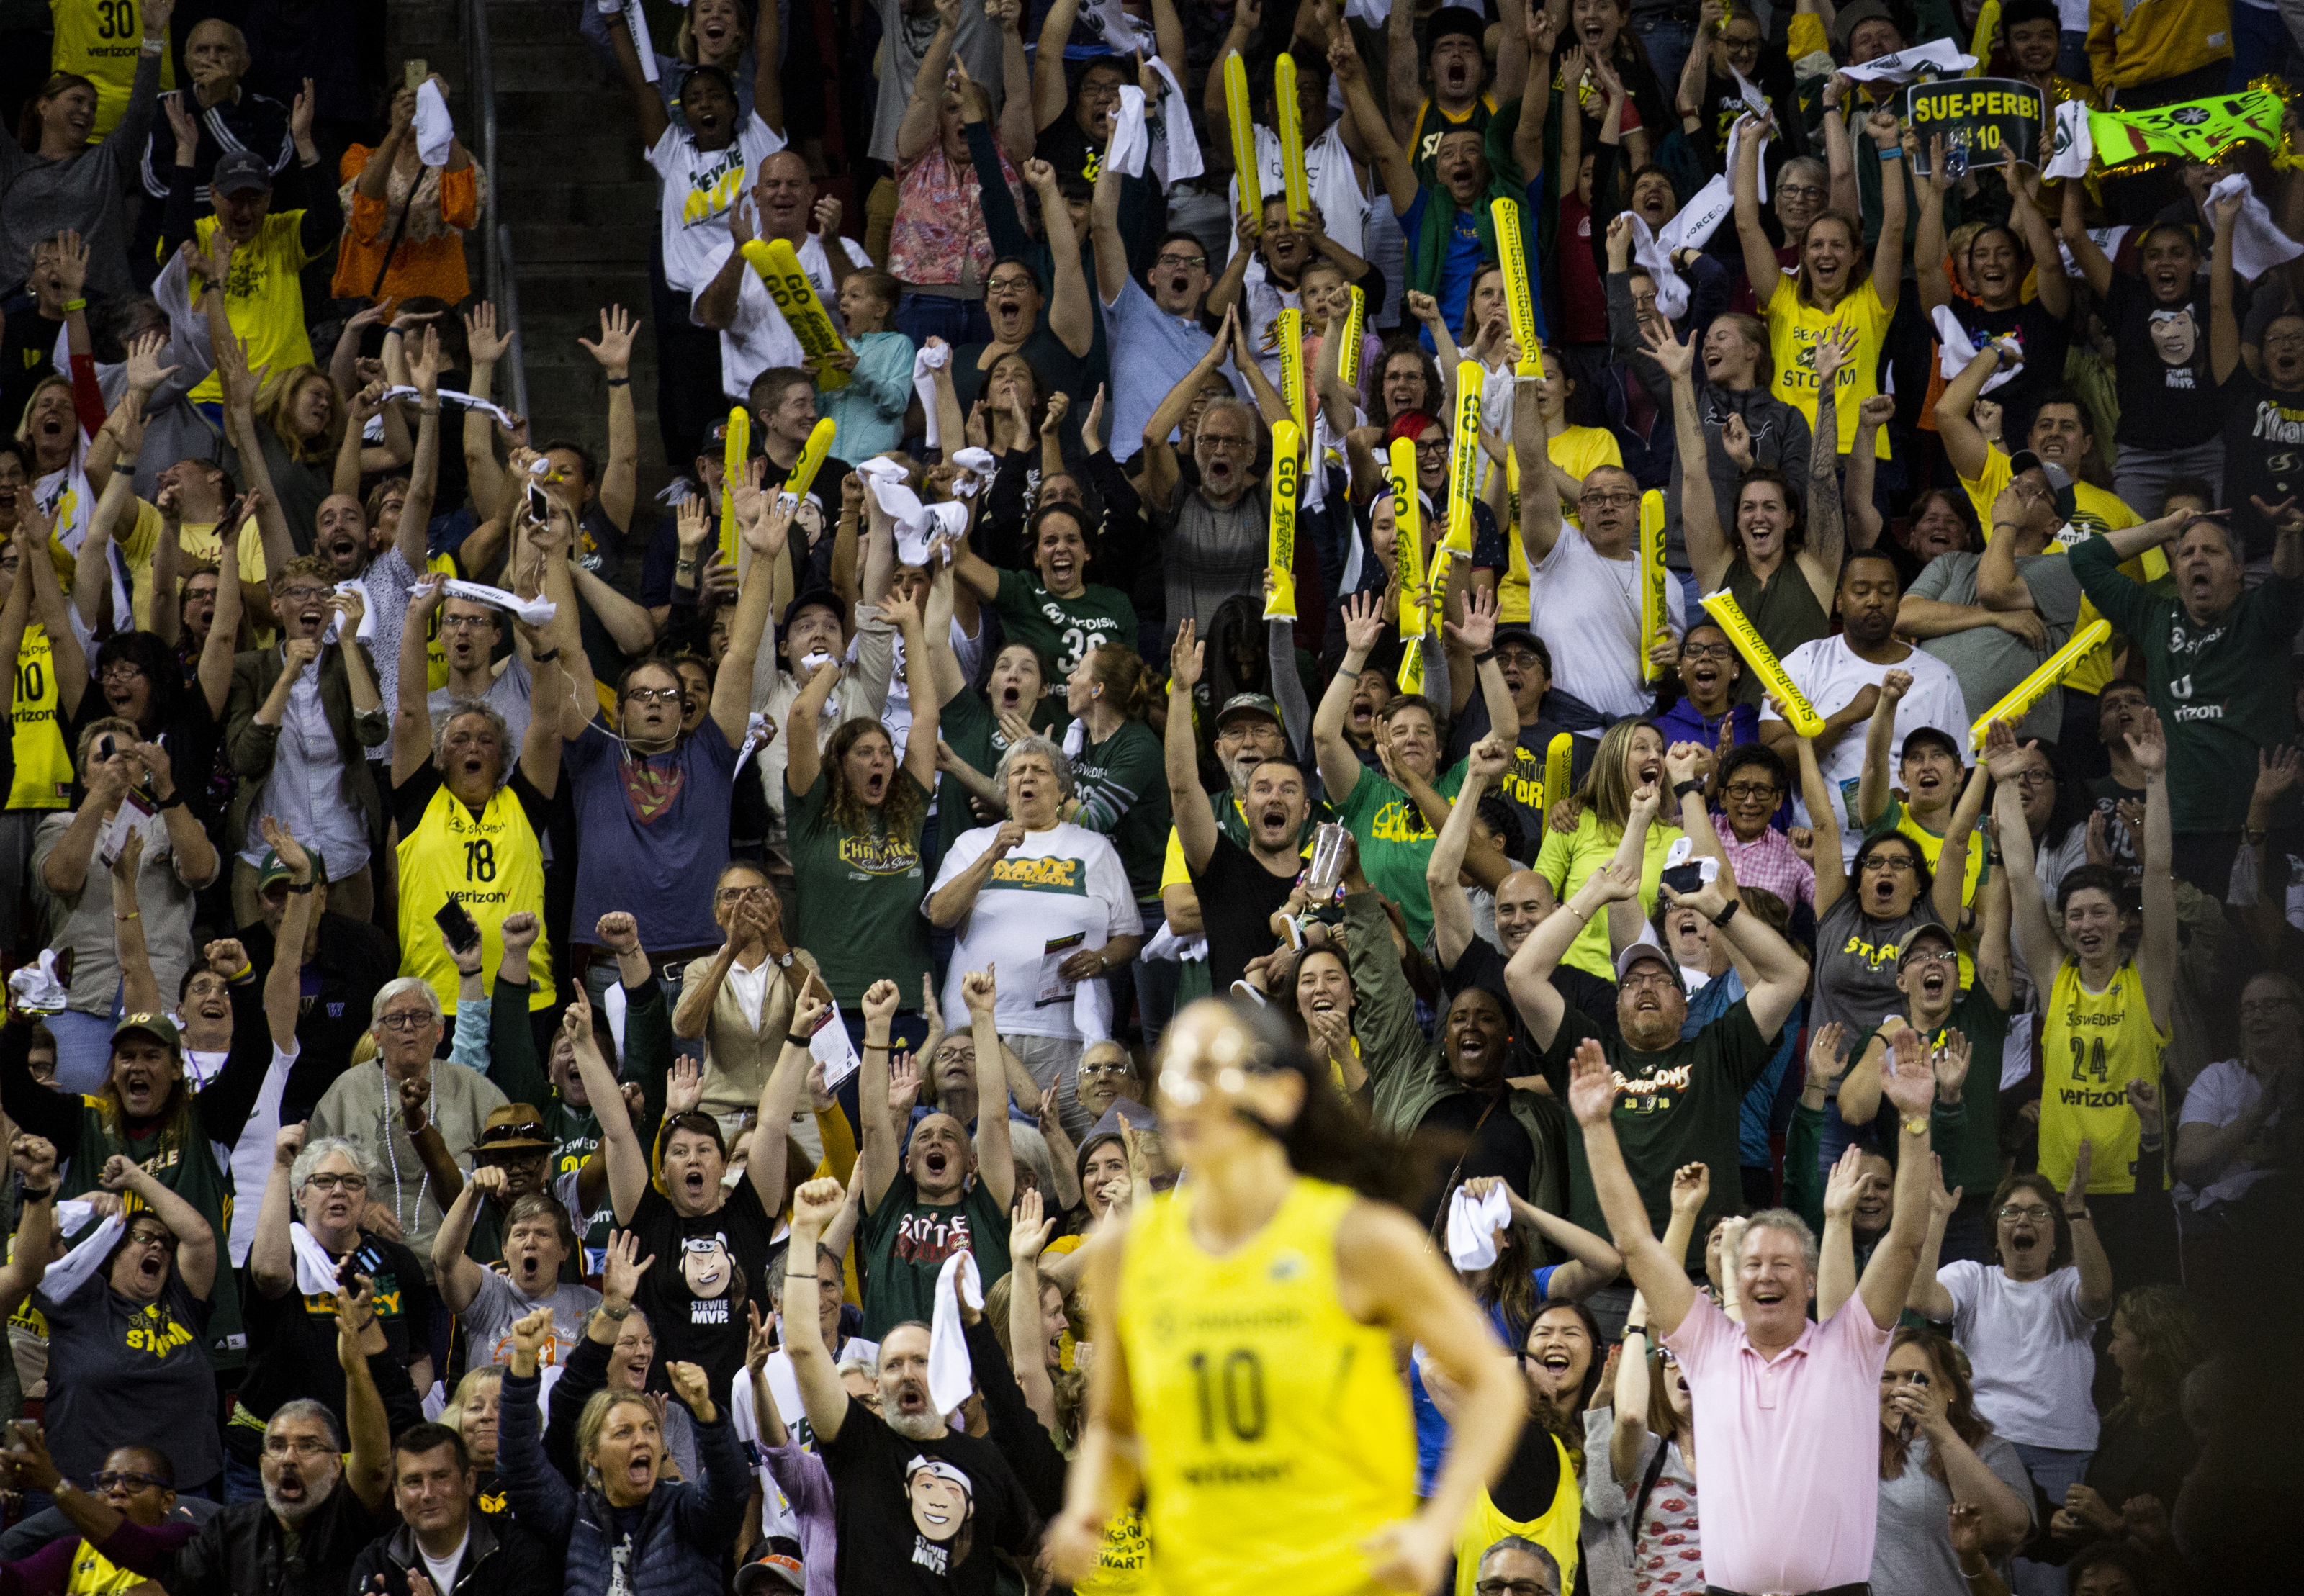 WNBA Ticket Prices: Everything You Need to Know